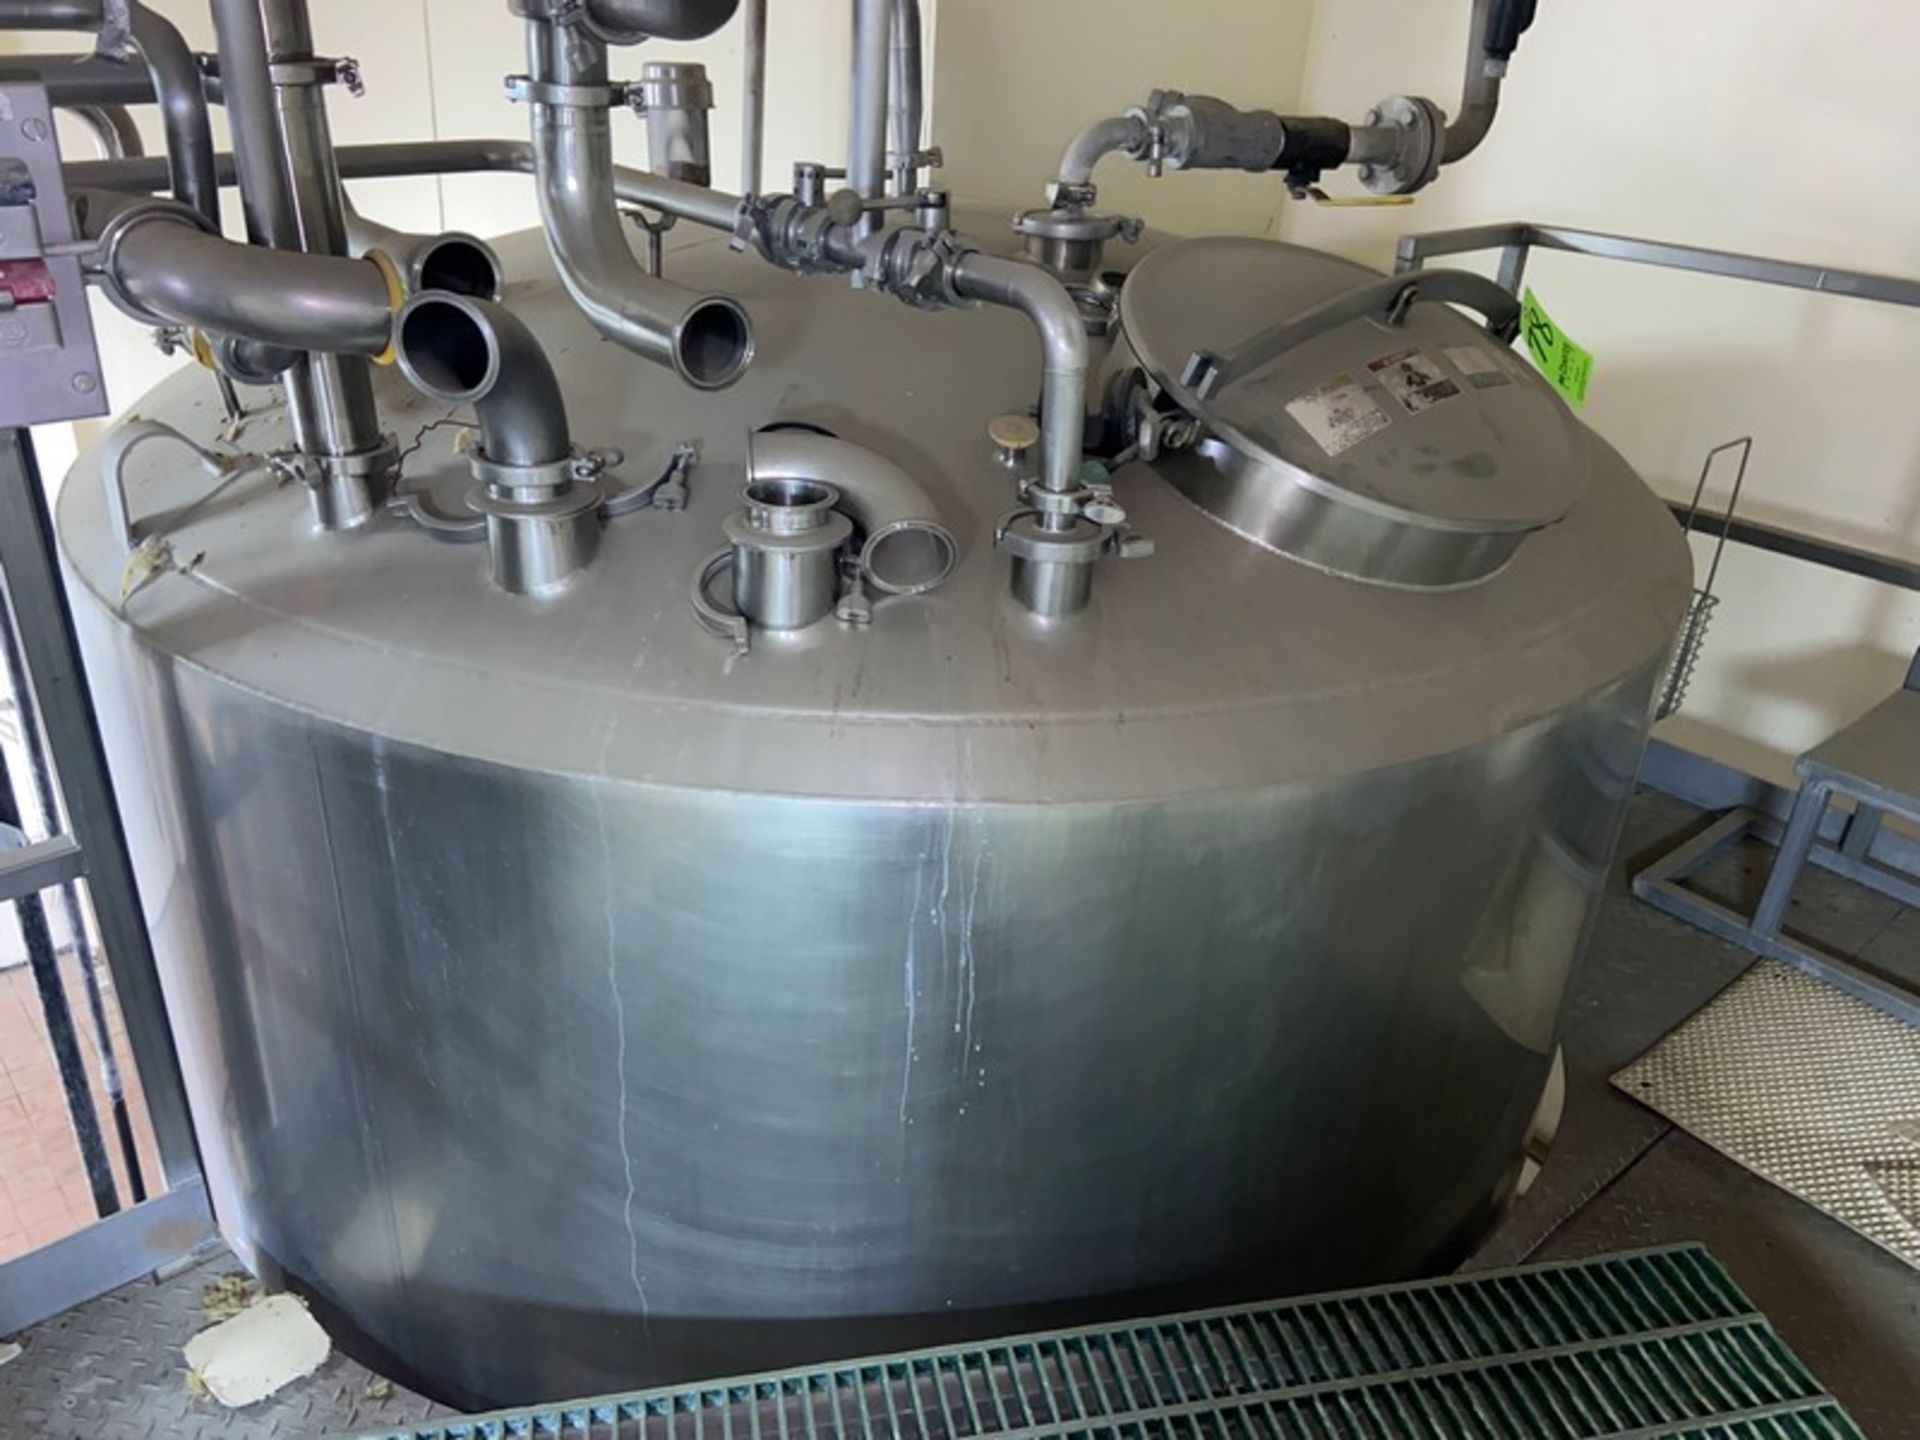 Sani Fab 2,500 Gal. Insulated Vertical Tank, M/N CCV, S/N 61089302, Cone Bottom, Mounted on S/S Legs - Image 4 of 11